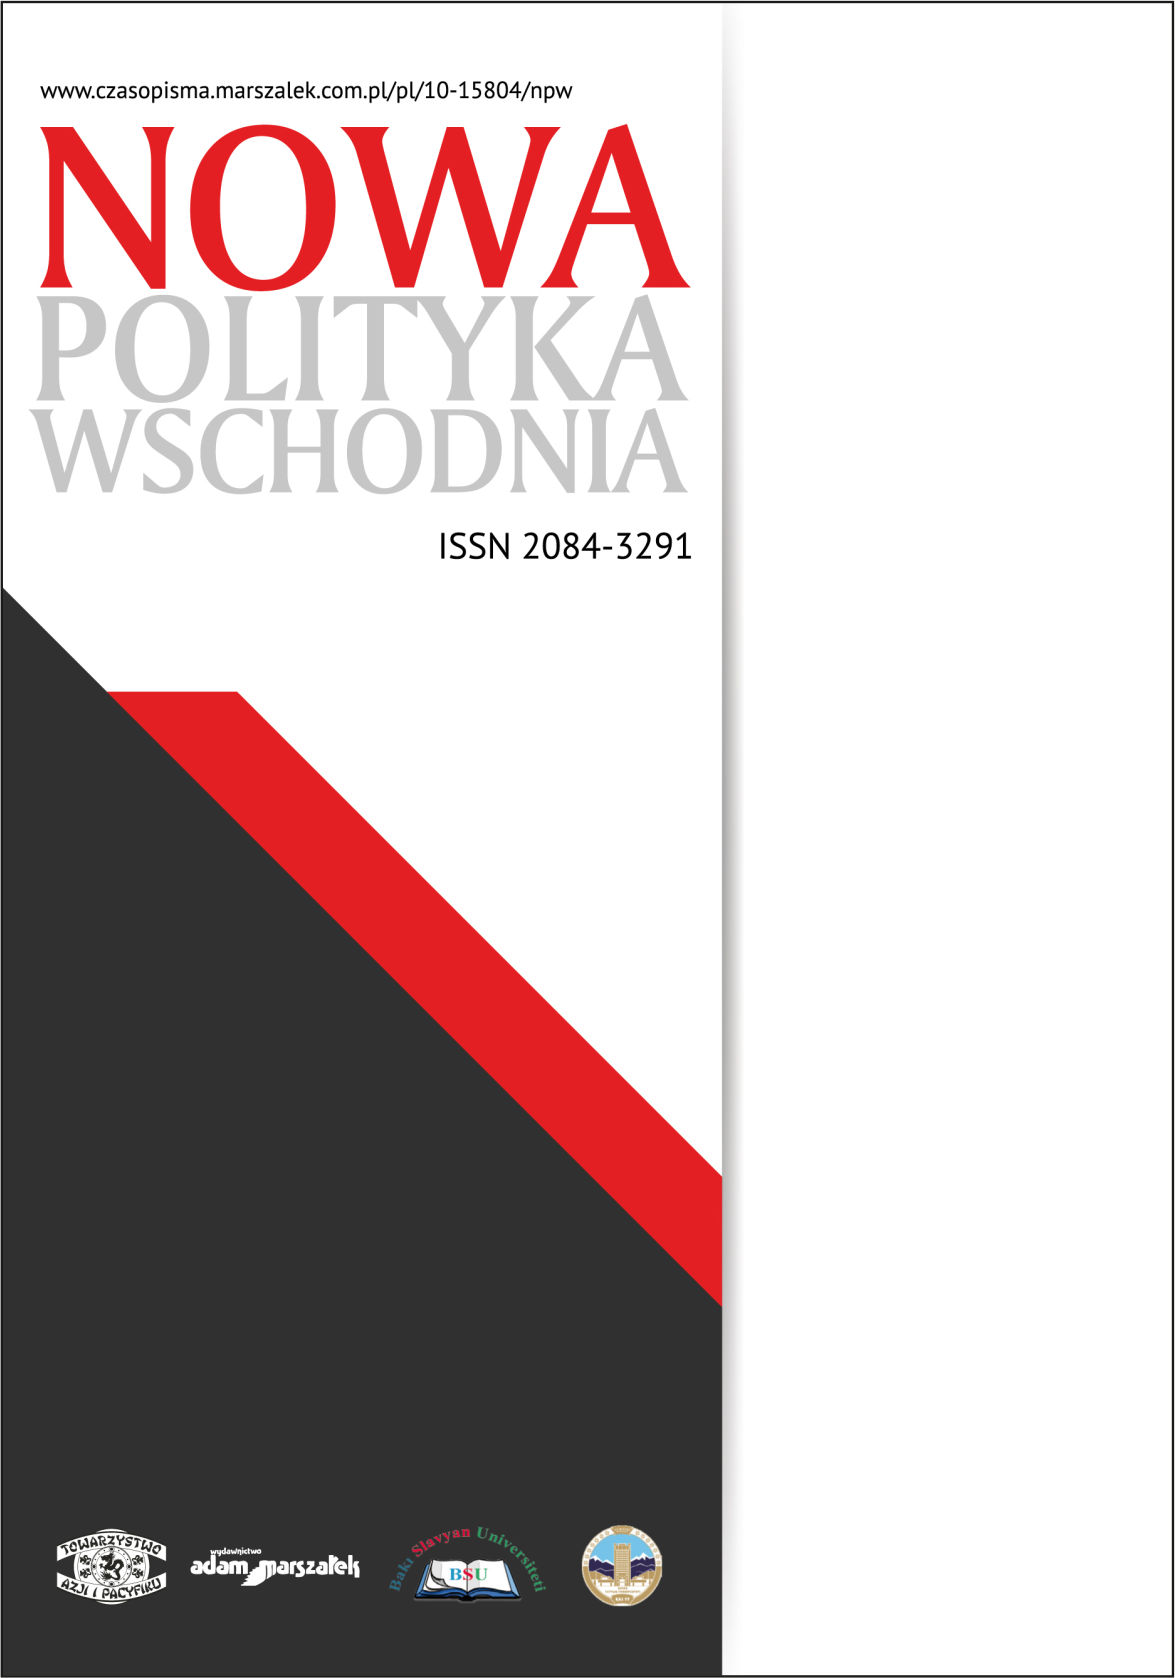 Non-governmental assistance to Ukrainian refugees by Polish society in the aftermath of the escalation of hostilities in 2022